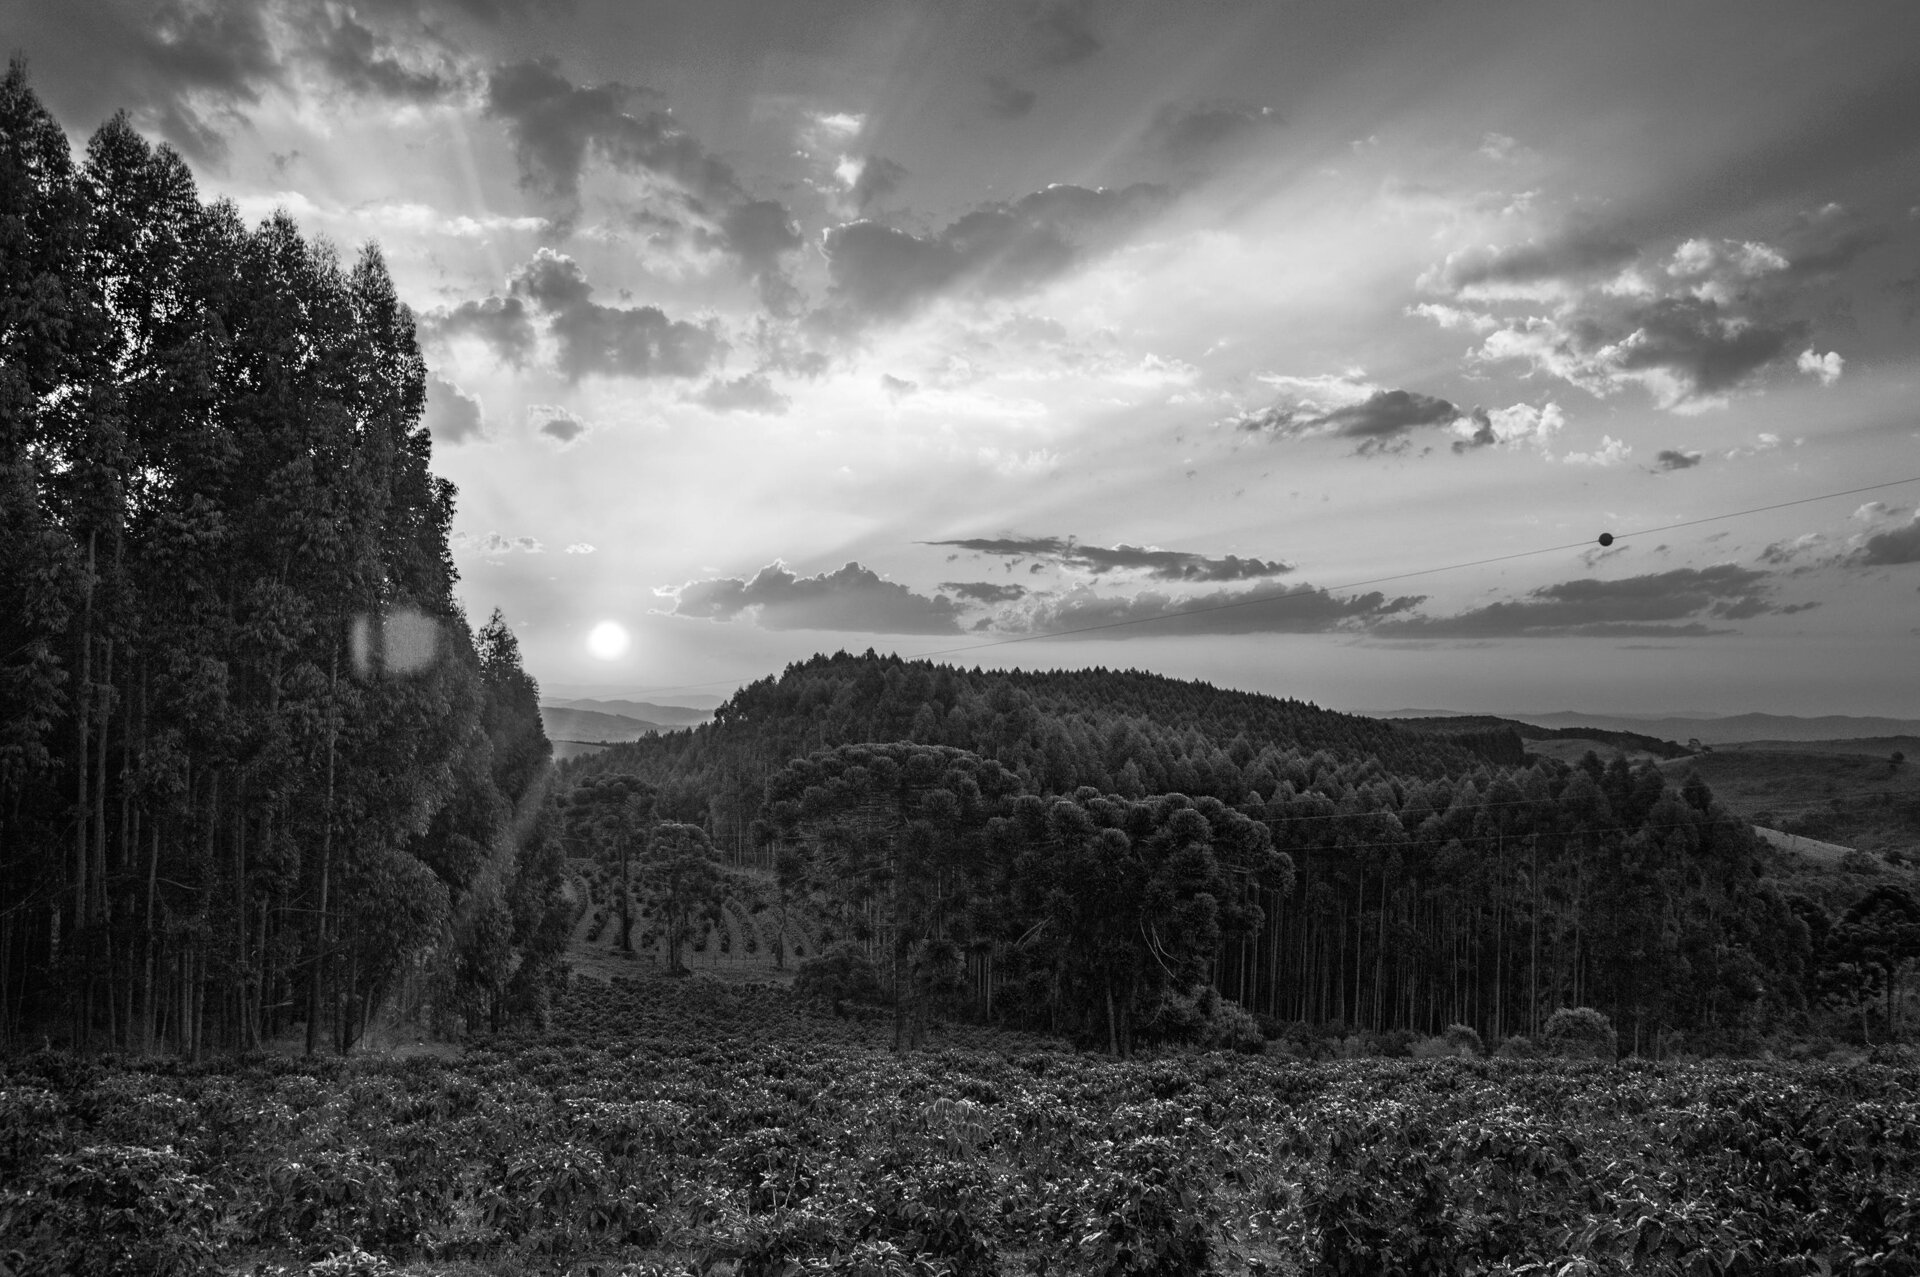 A coffee farm at sunset, with trees and a mountain beyond